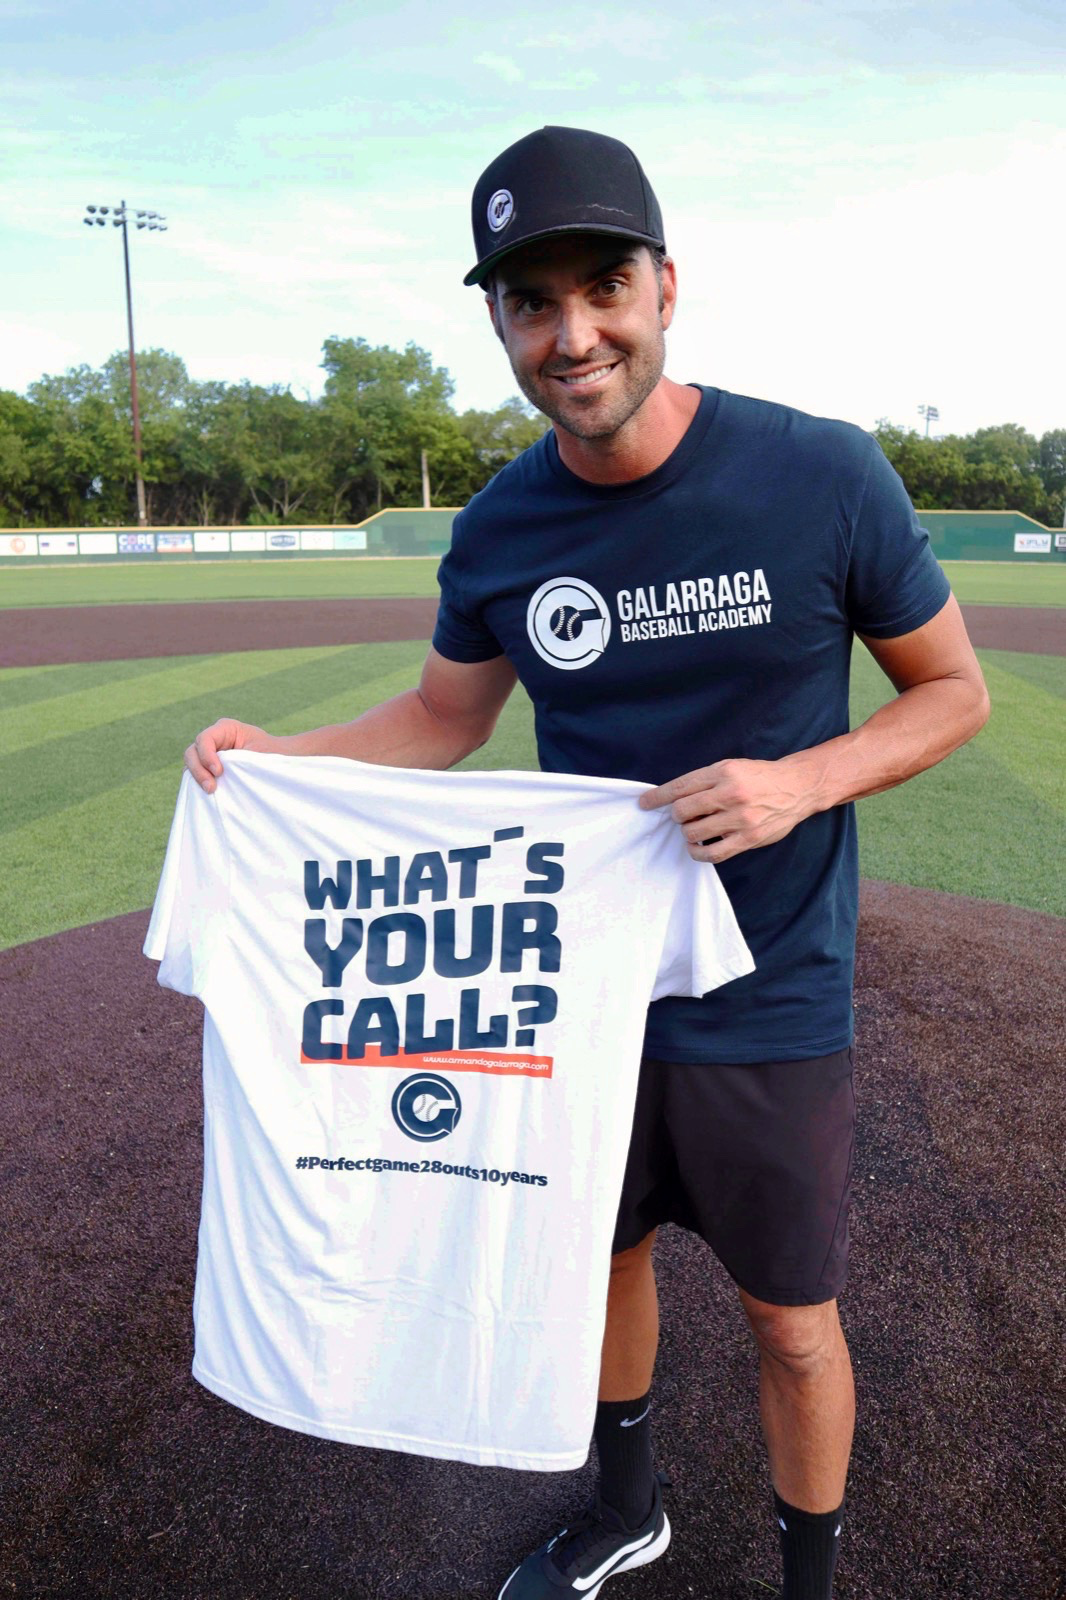 Former Tigers pitcher Armando Galarraga holds a T-shirt commemorating his one-hitter June 2, 2010, at Comerica Park.